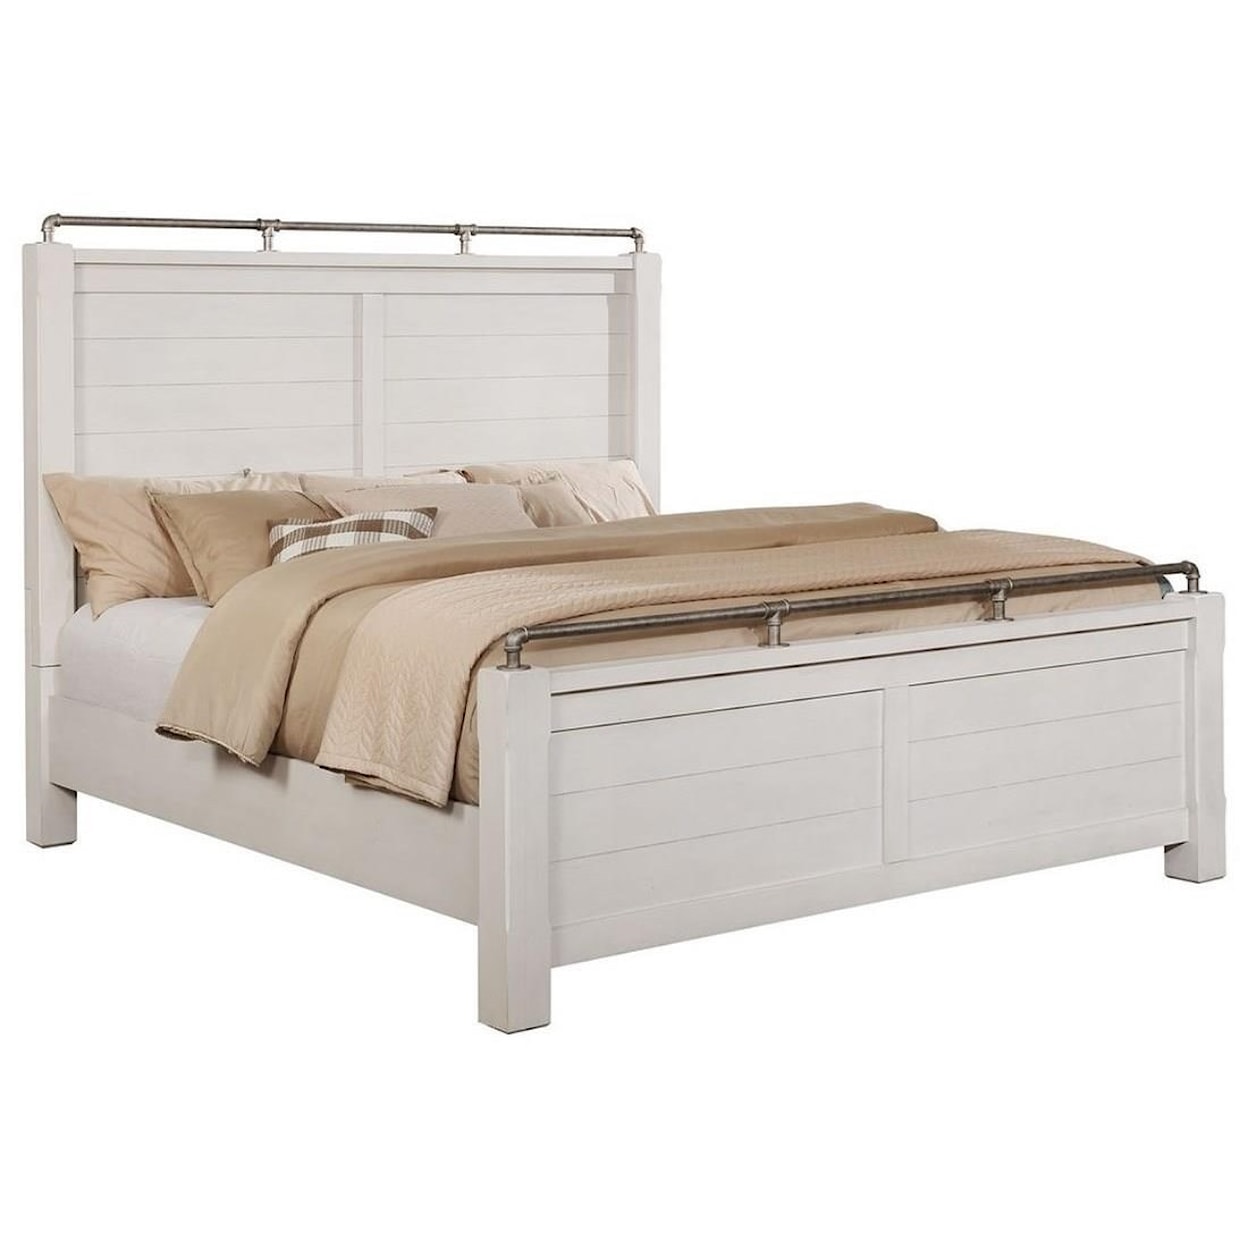 Avalon Furniture Bellville - White Queen Post Bed